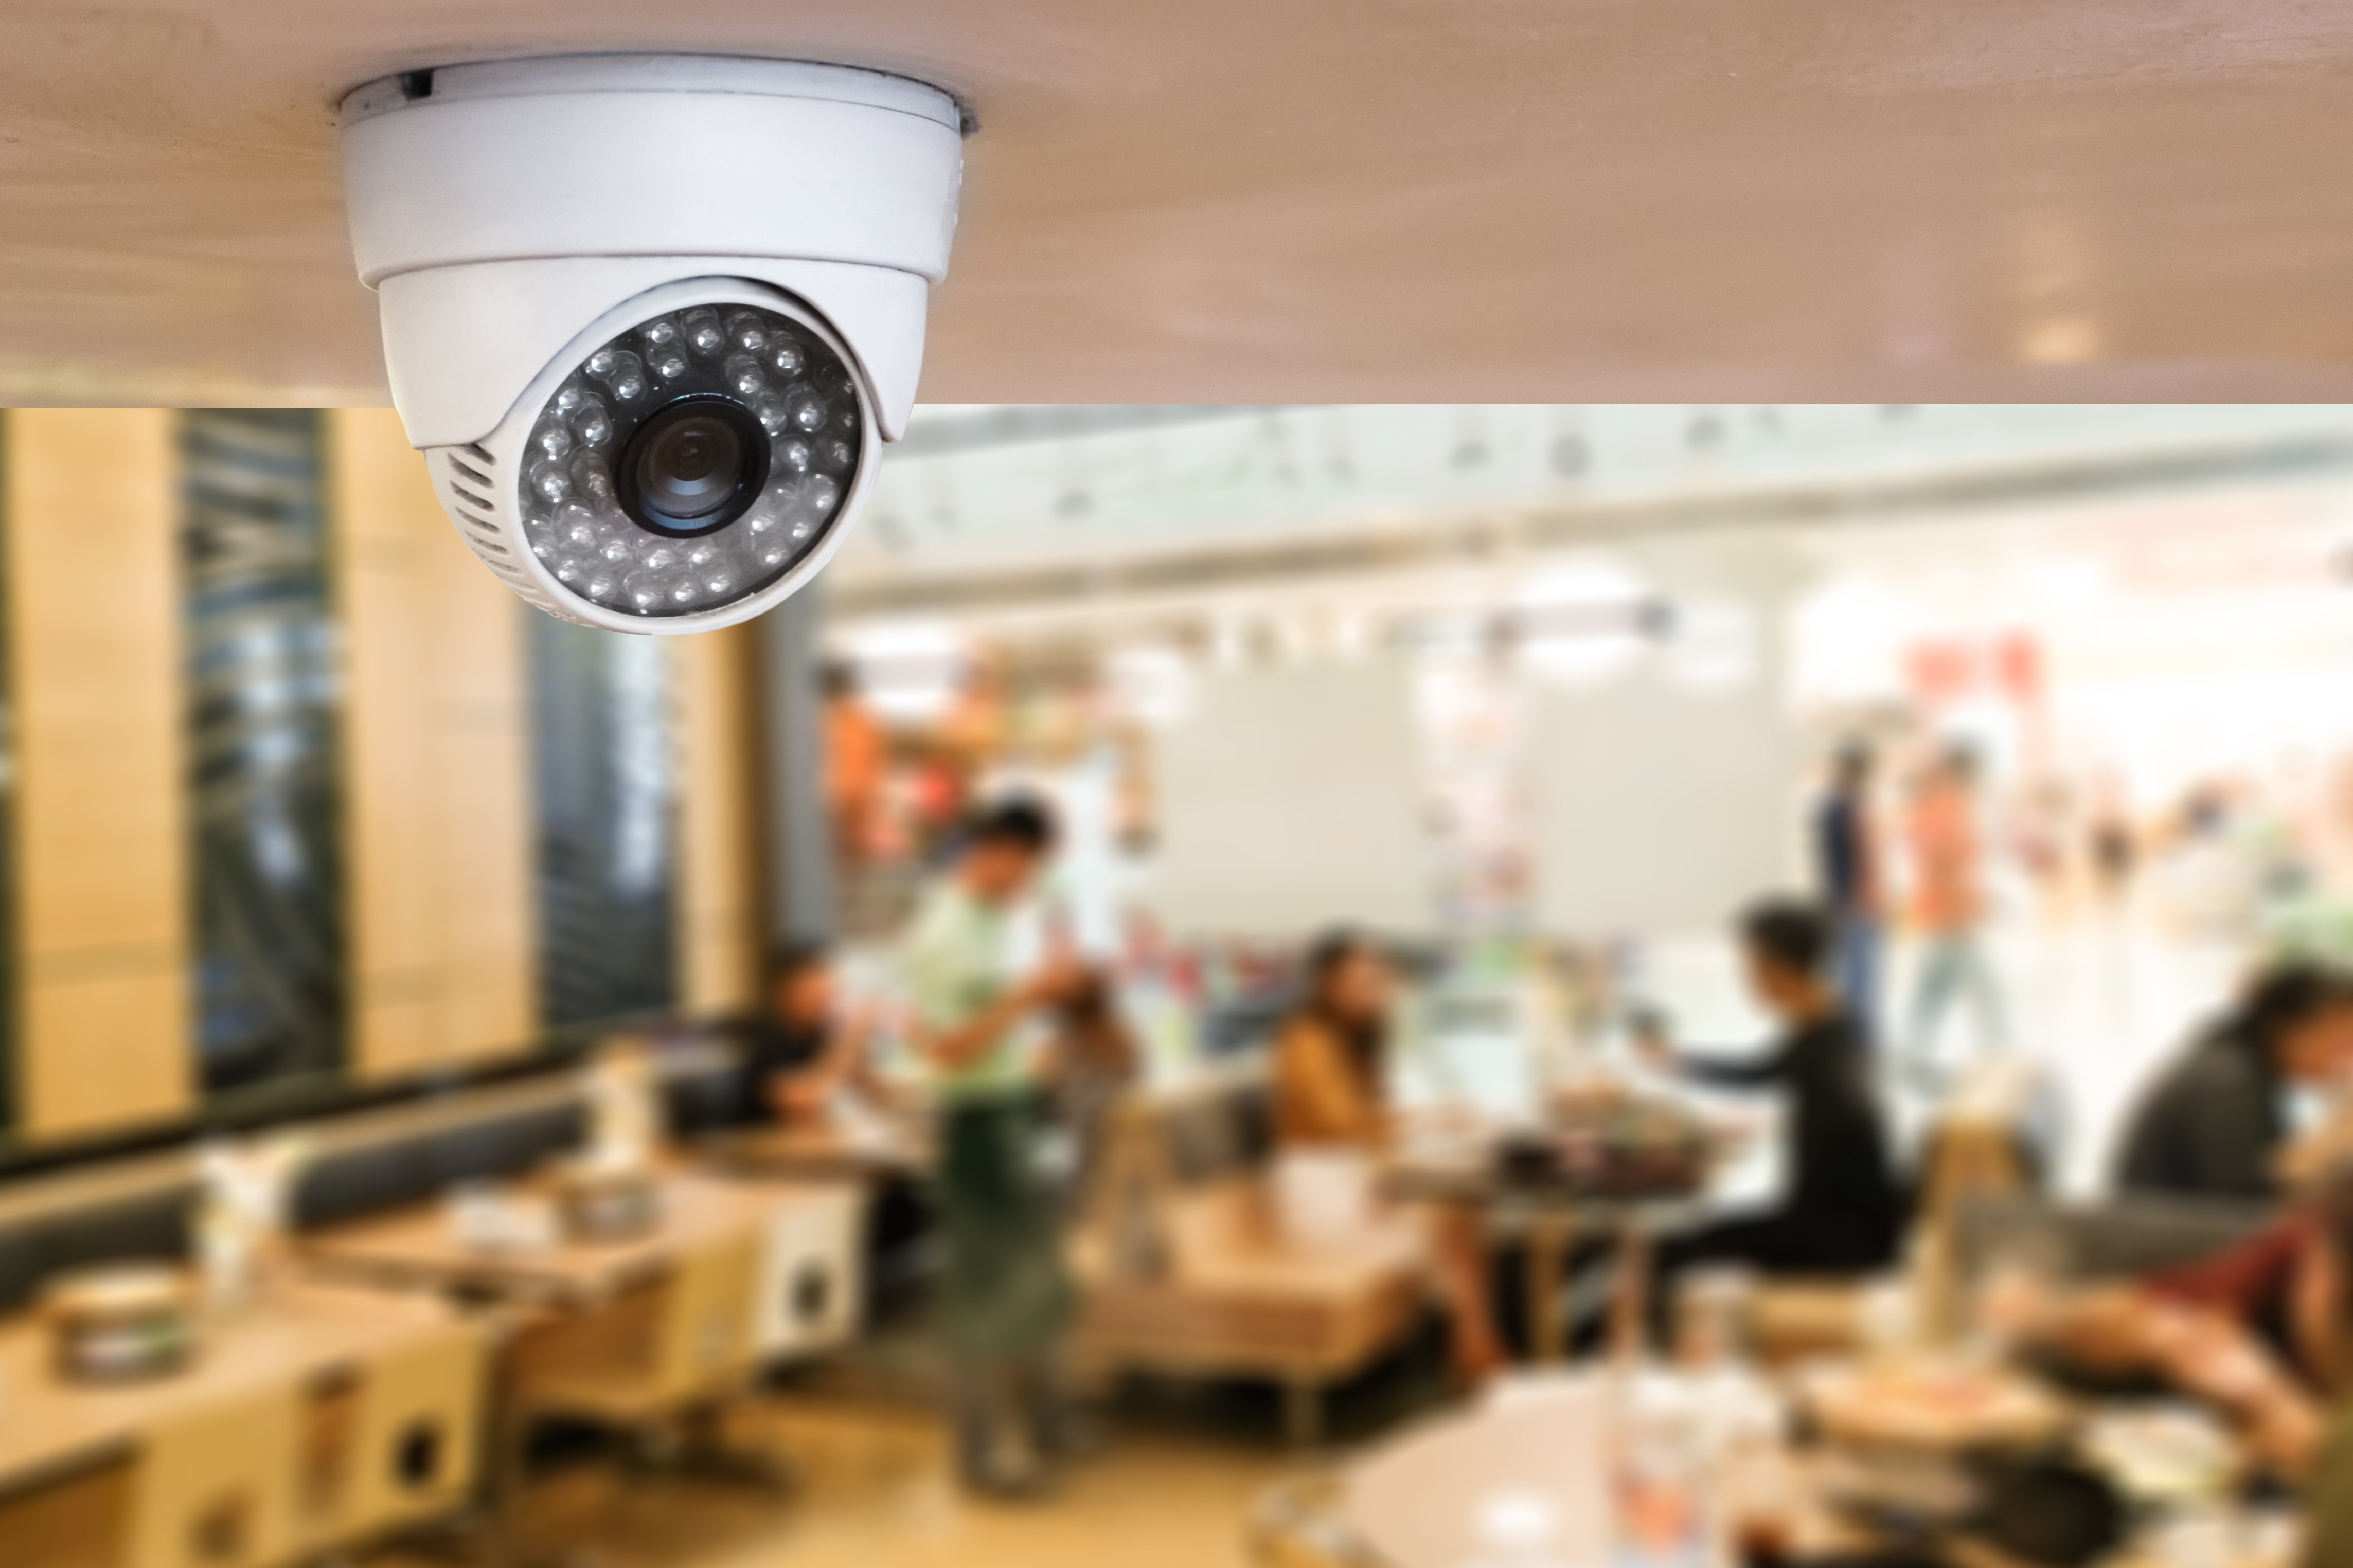 Can I Record Sound on My Business CCTV System?